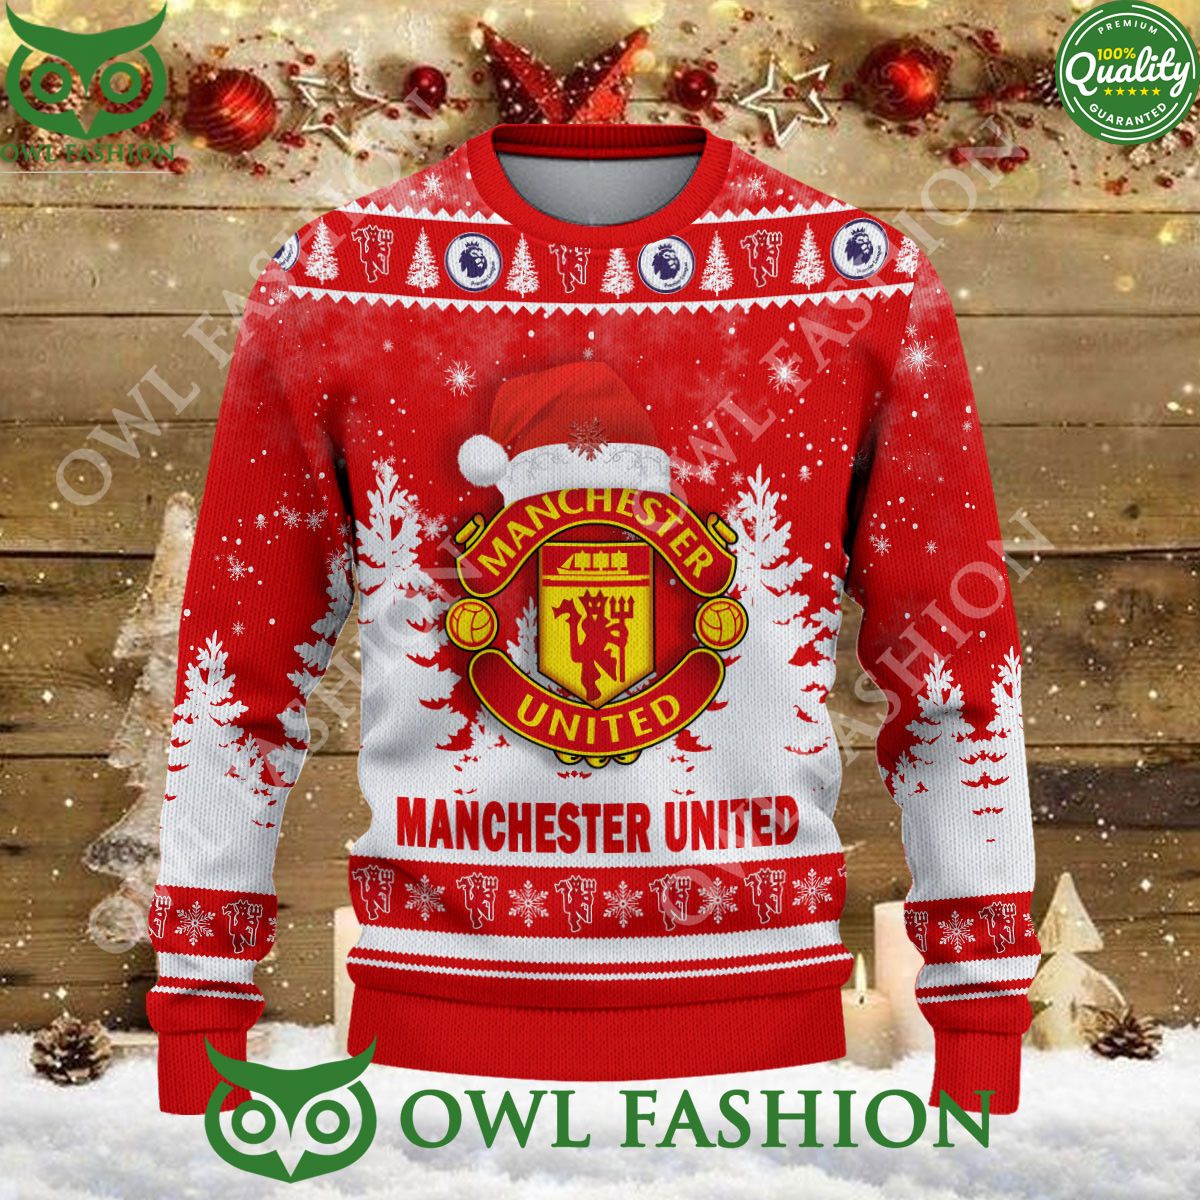 christmas football manchester united efl ugly premier league sweater jumper 2 OuRGk.jpg